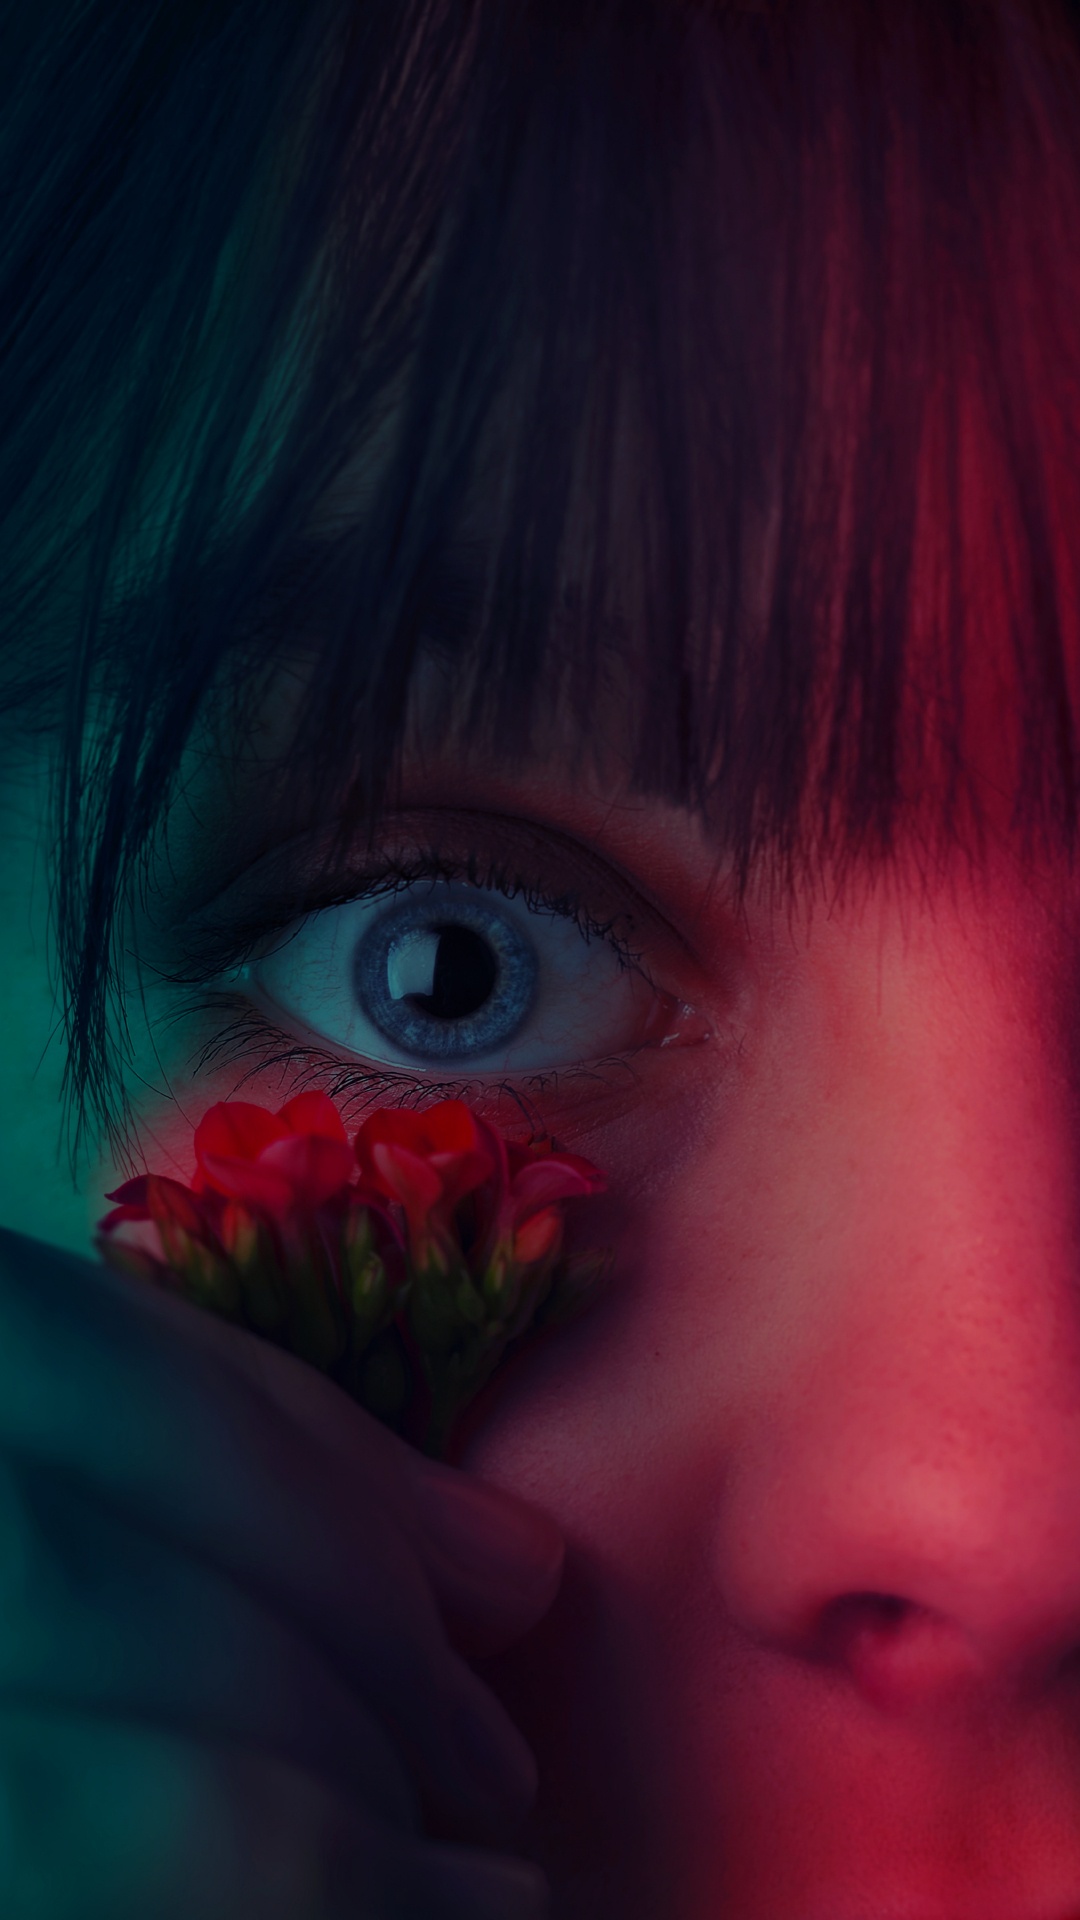 Girl With Red Flower on Her Face. Wallpaper in 1080x1920 Resolution